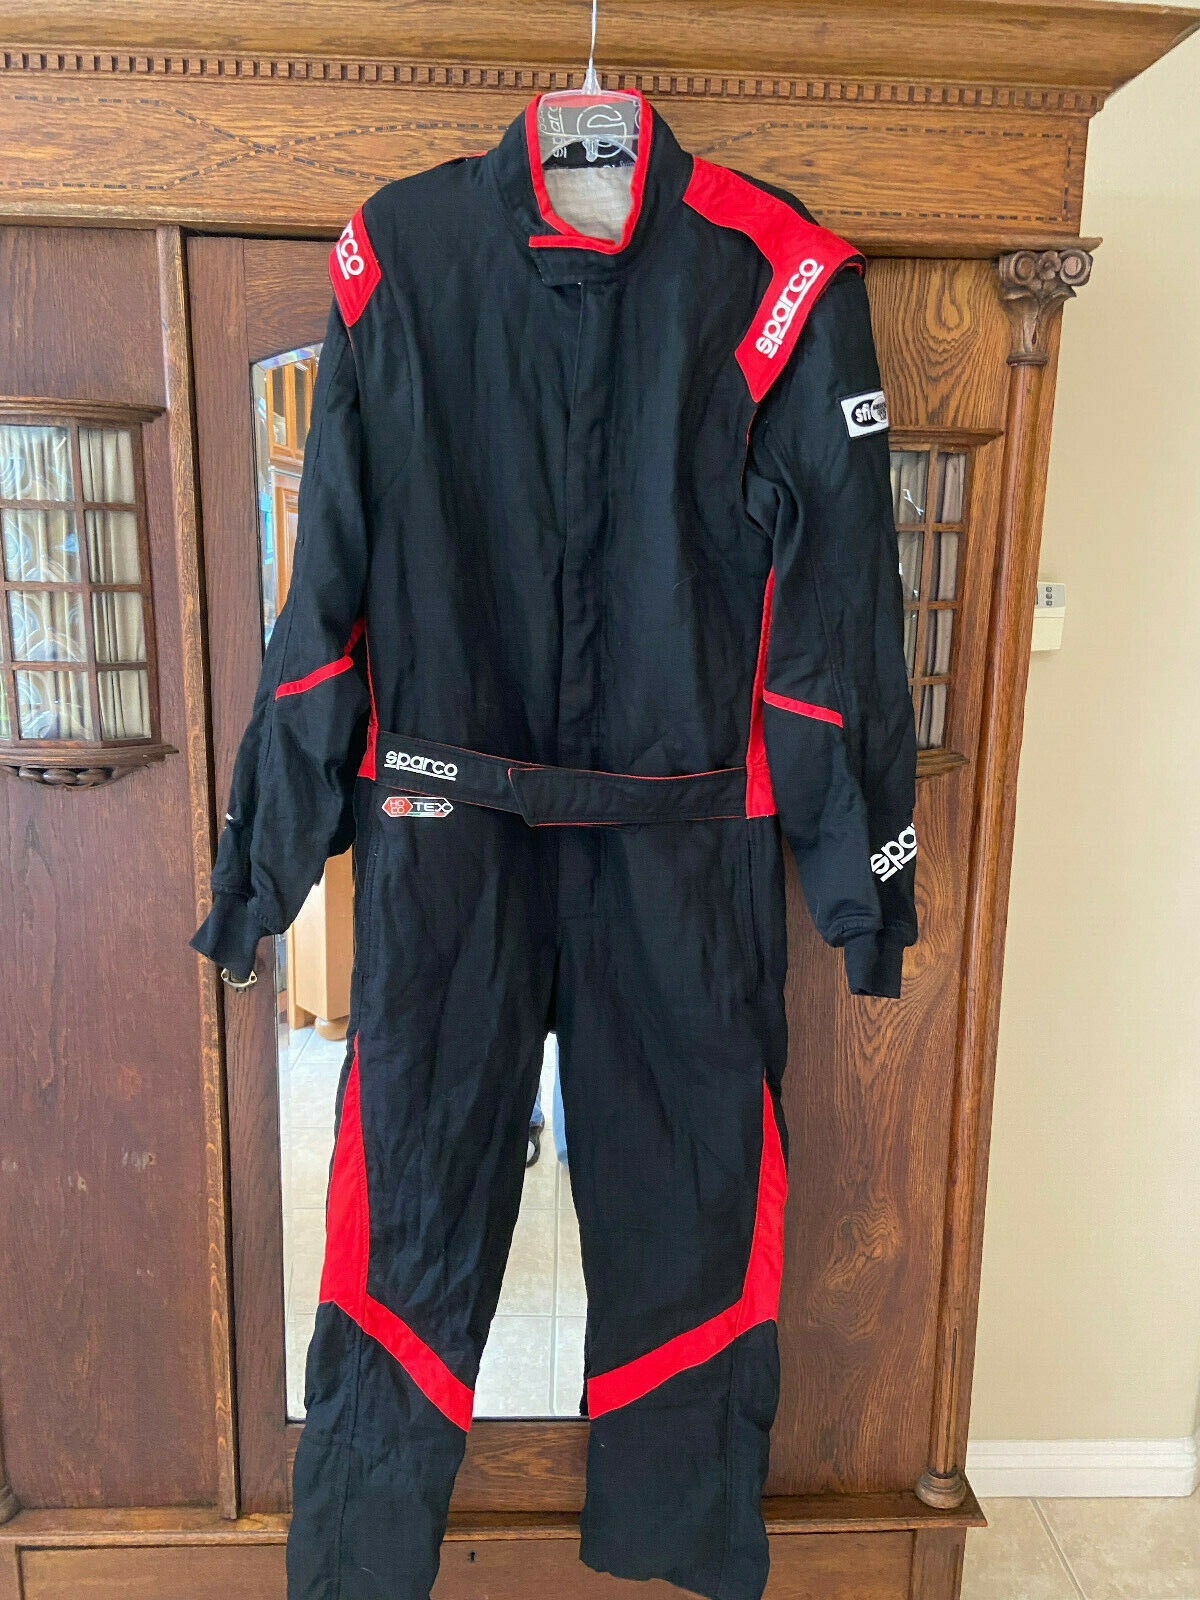 Sparco Victory Rs-7 Nomex Racing Suit Boot Cut Size 56 Black With Red Fia-sfi